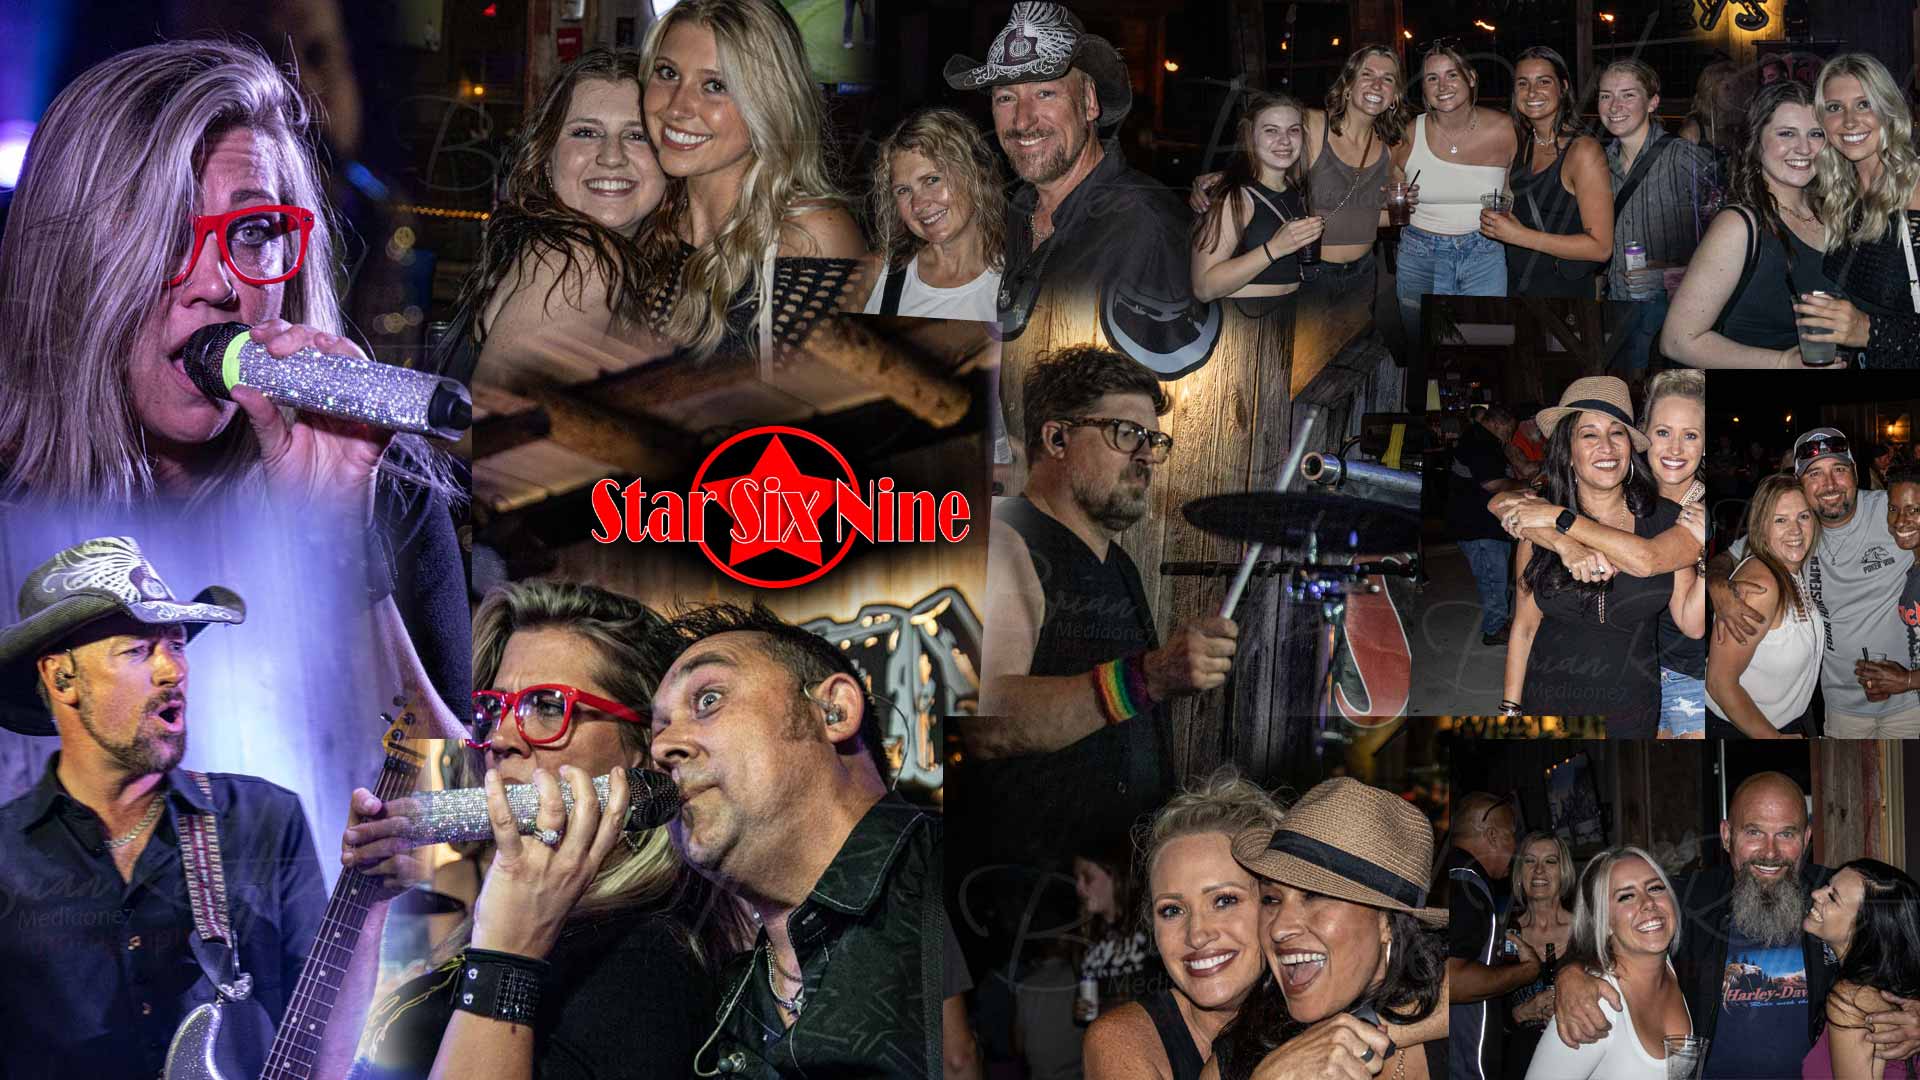 Star Six Nine band on the patio at Maloney's